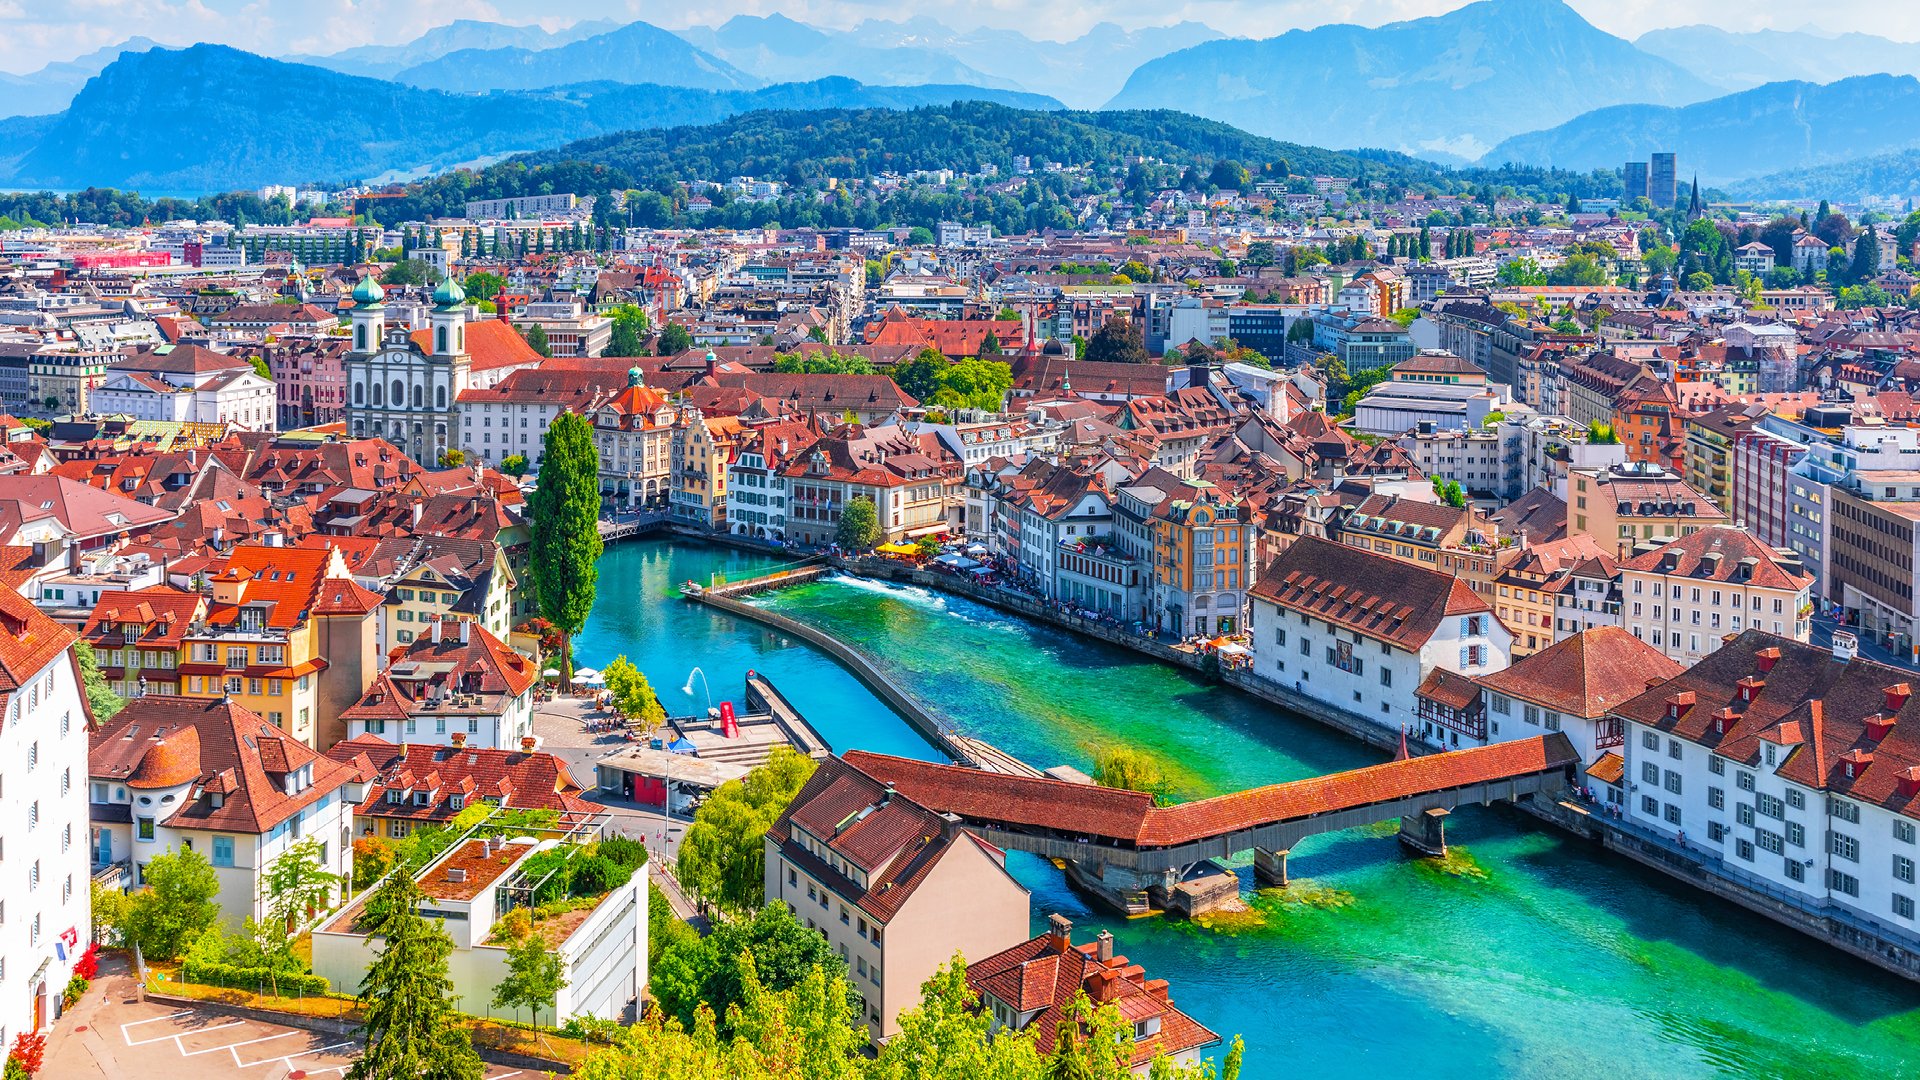 Stroll through old town, Lucerne on your luxury Switzerland vacation.